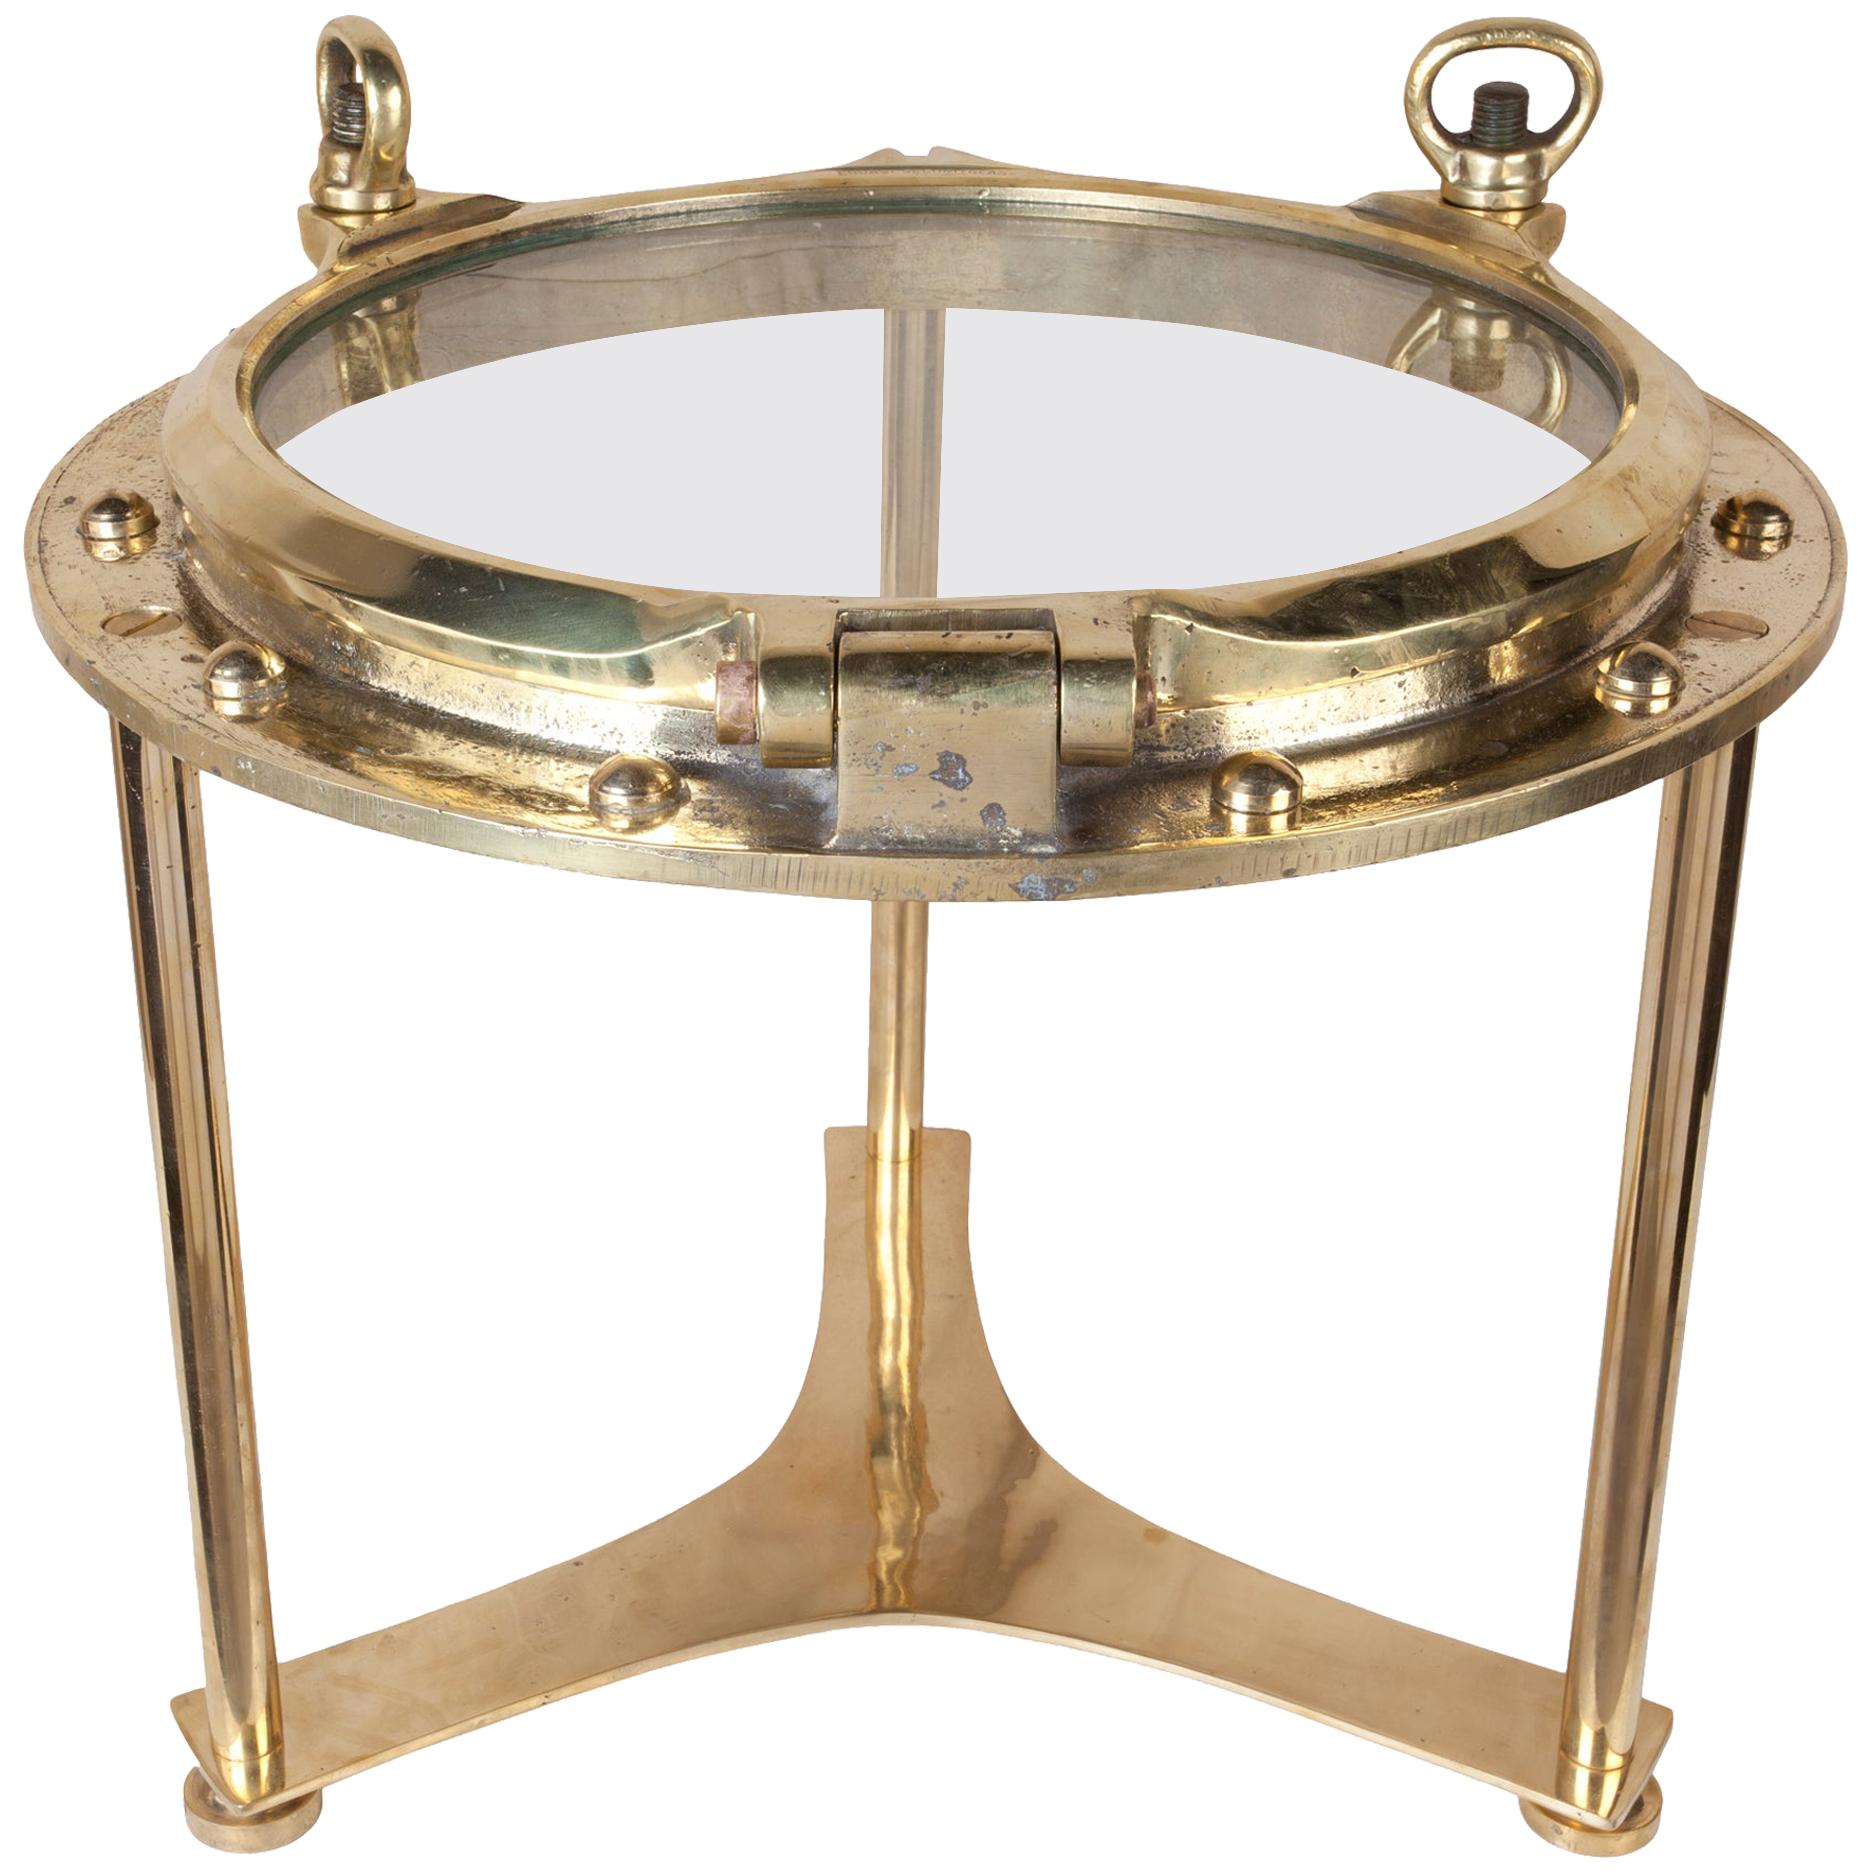 Ship's Brass Porthole Coffee or Side Table by Deborah Lockhart Phillips